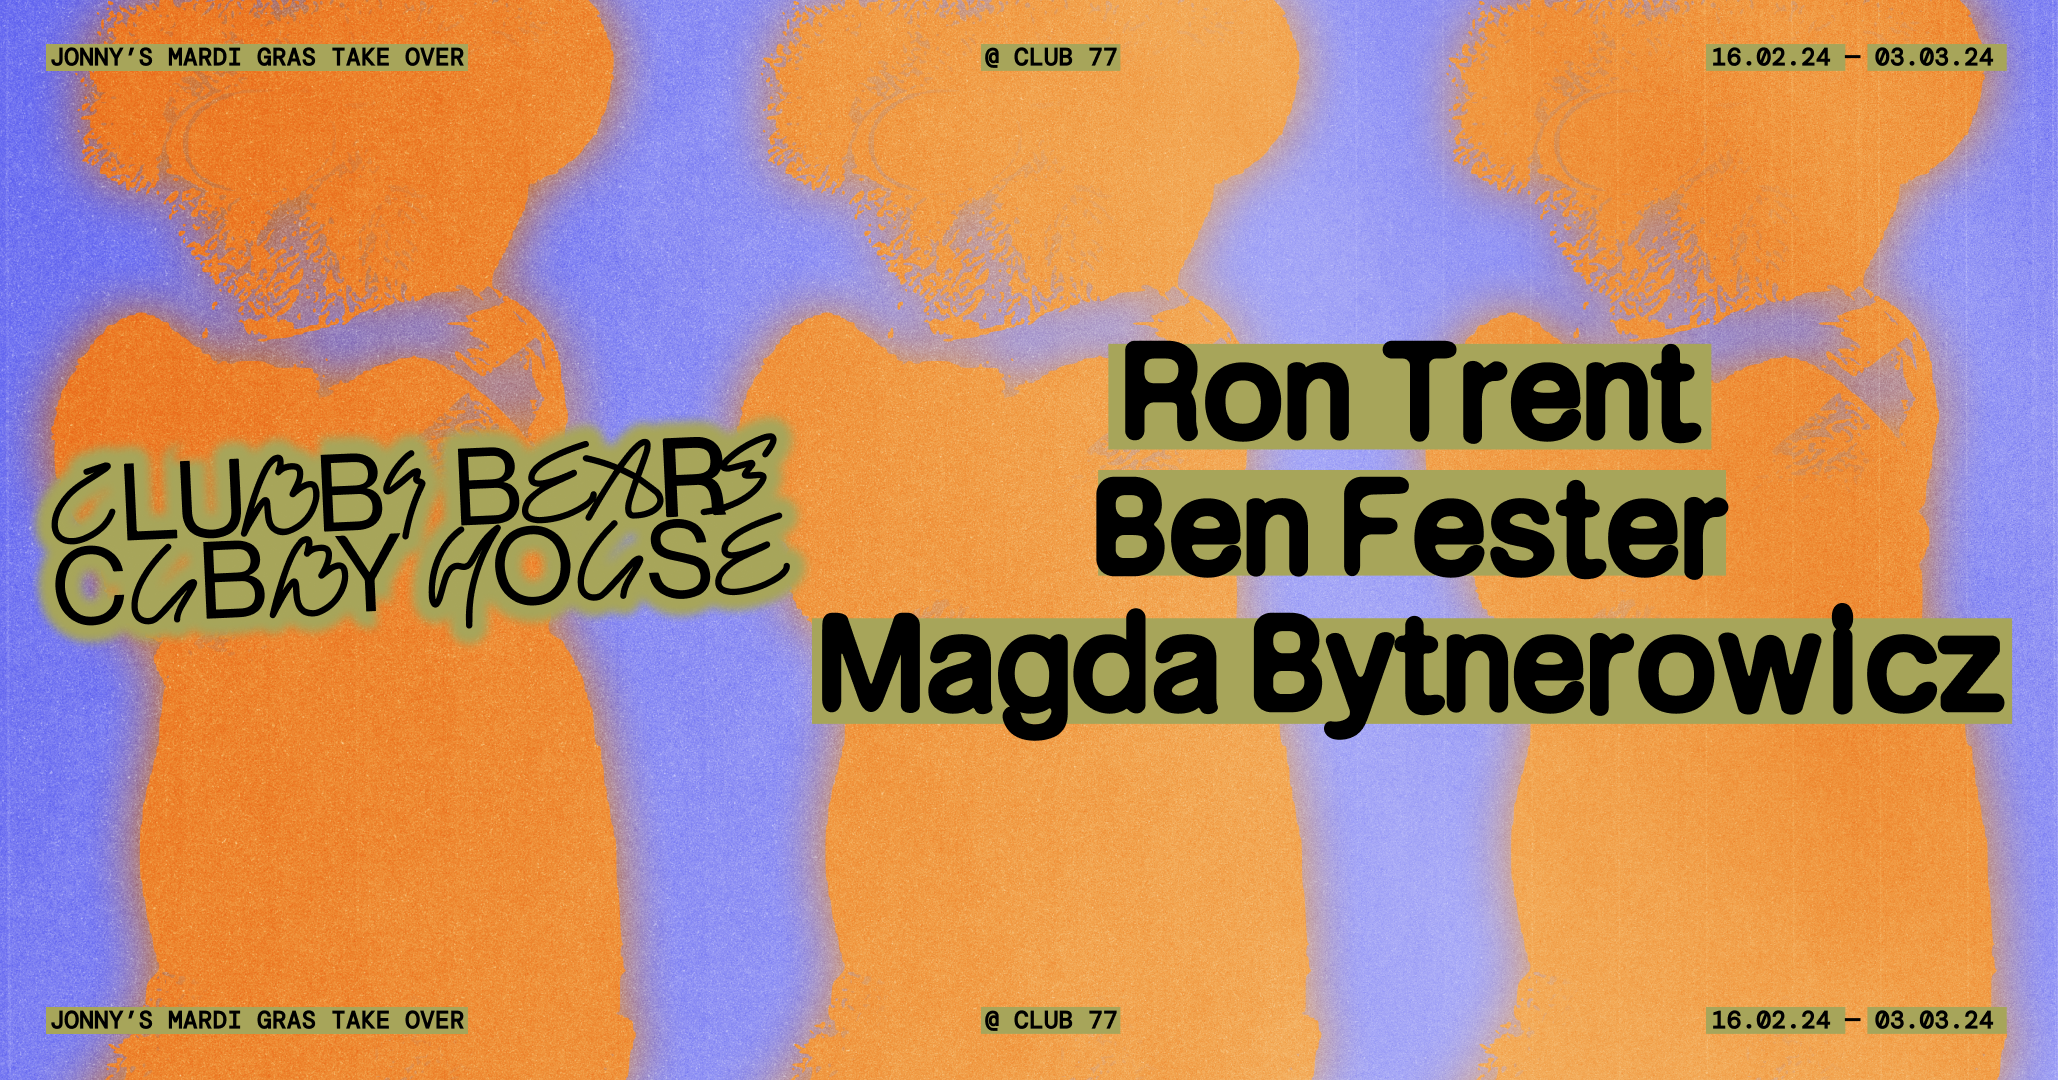 Clubby Bears Cubby House with Ron Trent, Ben Fester & Magda Bytnerowicz - フライヤー表